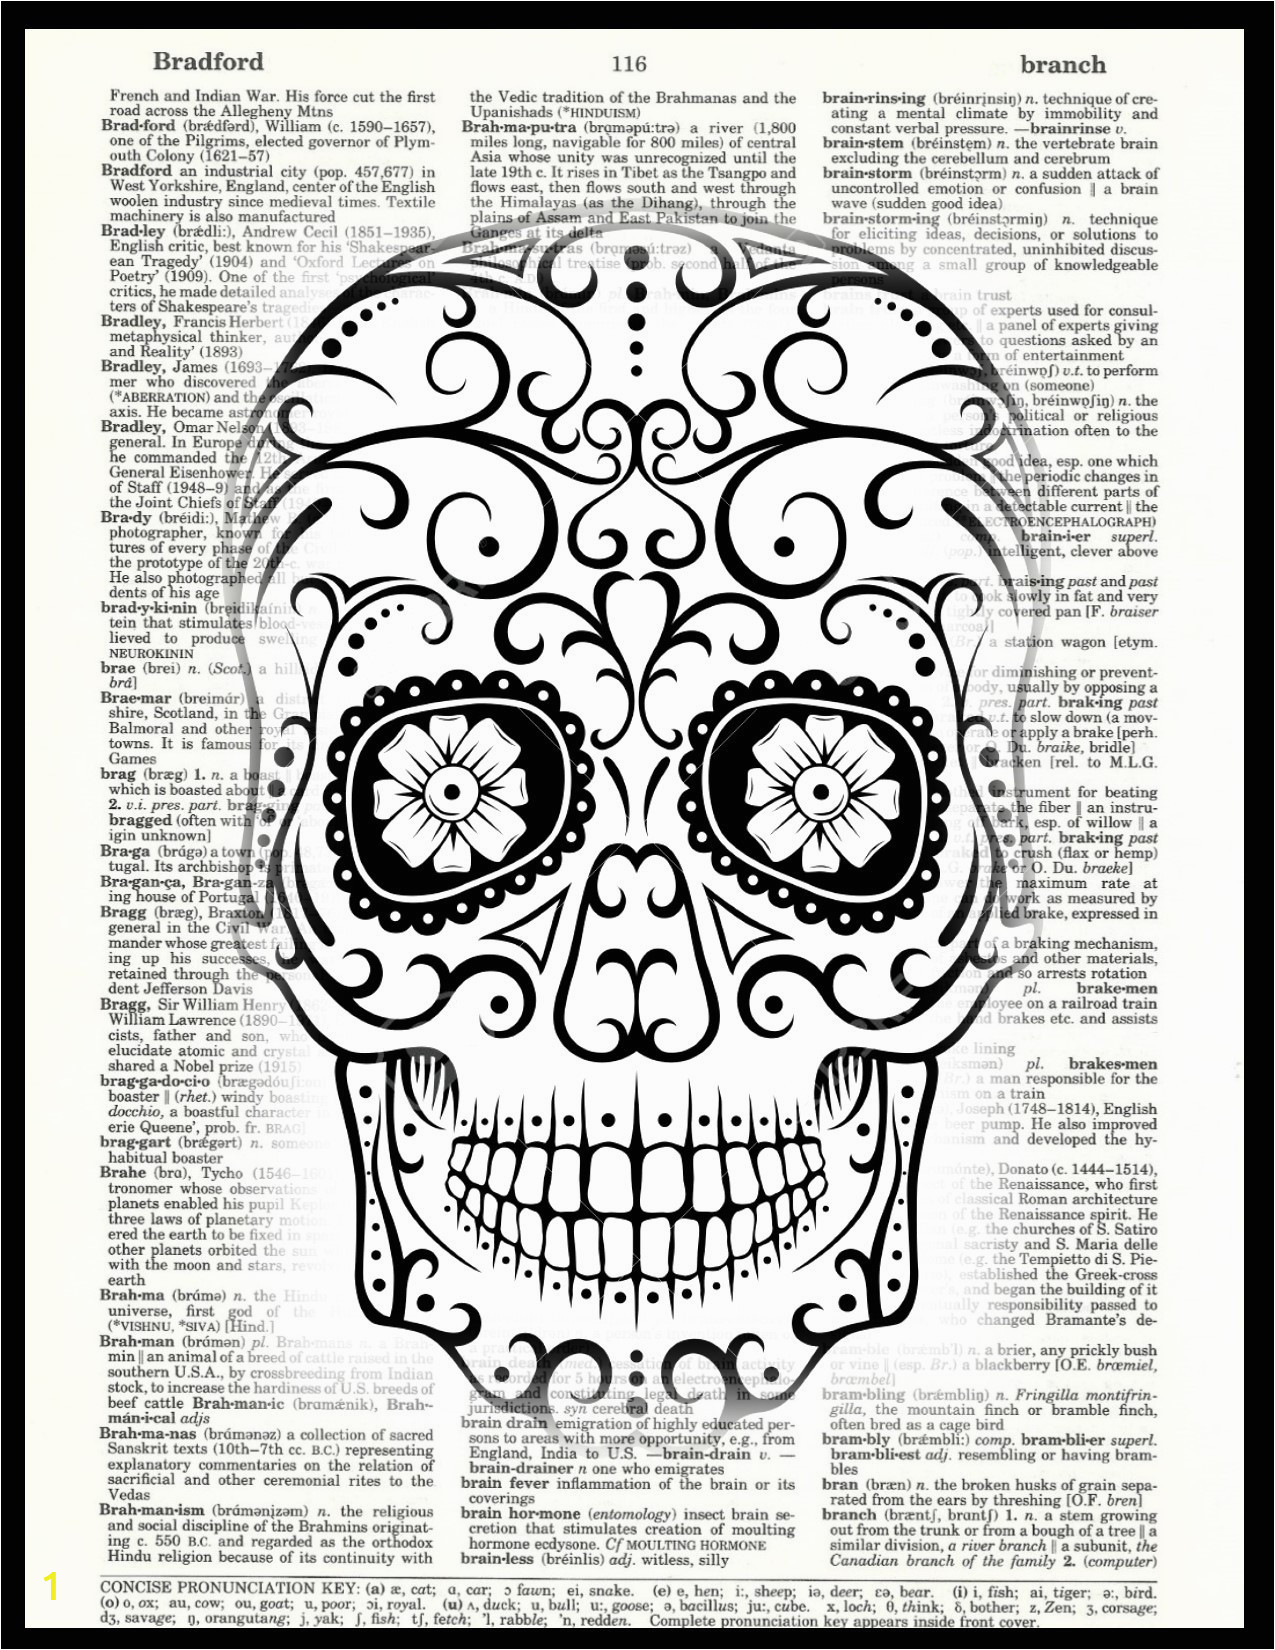 Printable Day Of the Dead Coloring Pages Best Coloring Printablegar Skull Pages for Kids Female